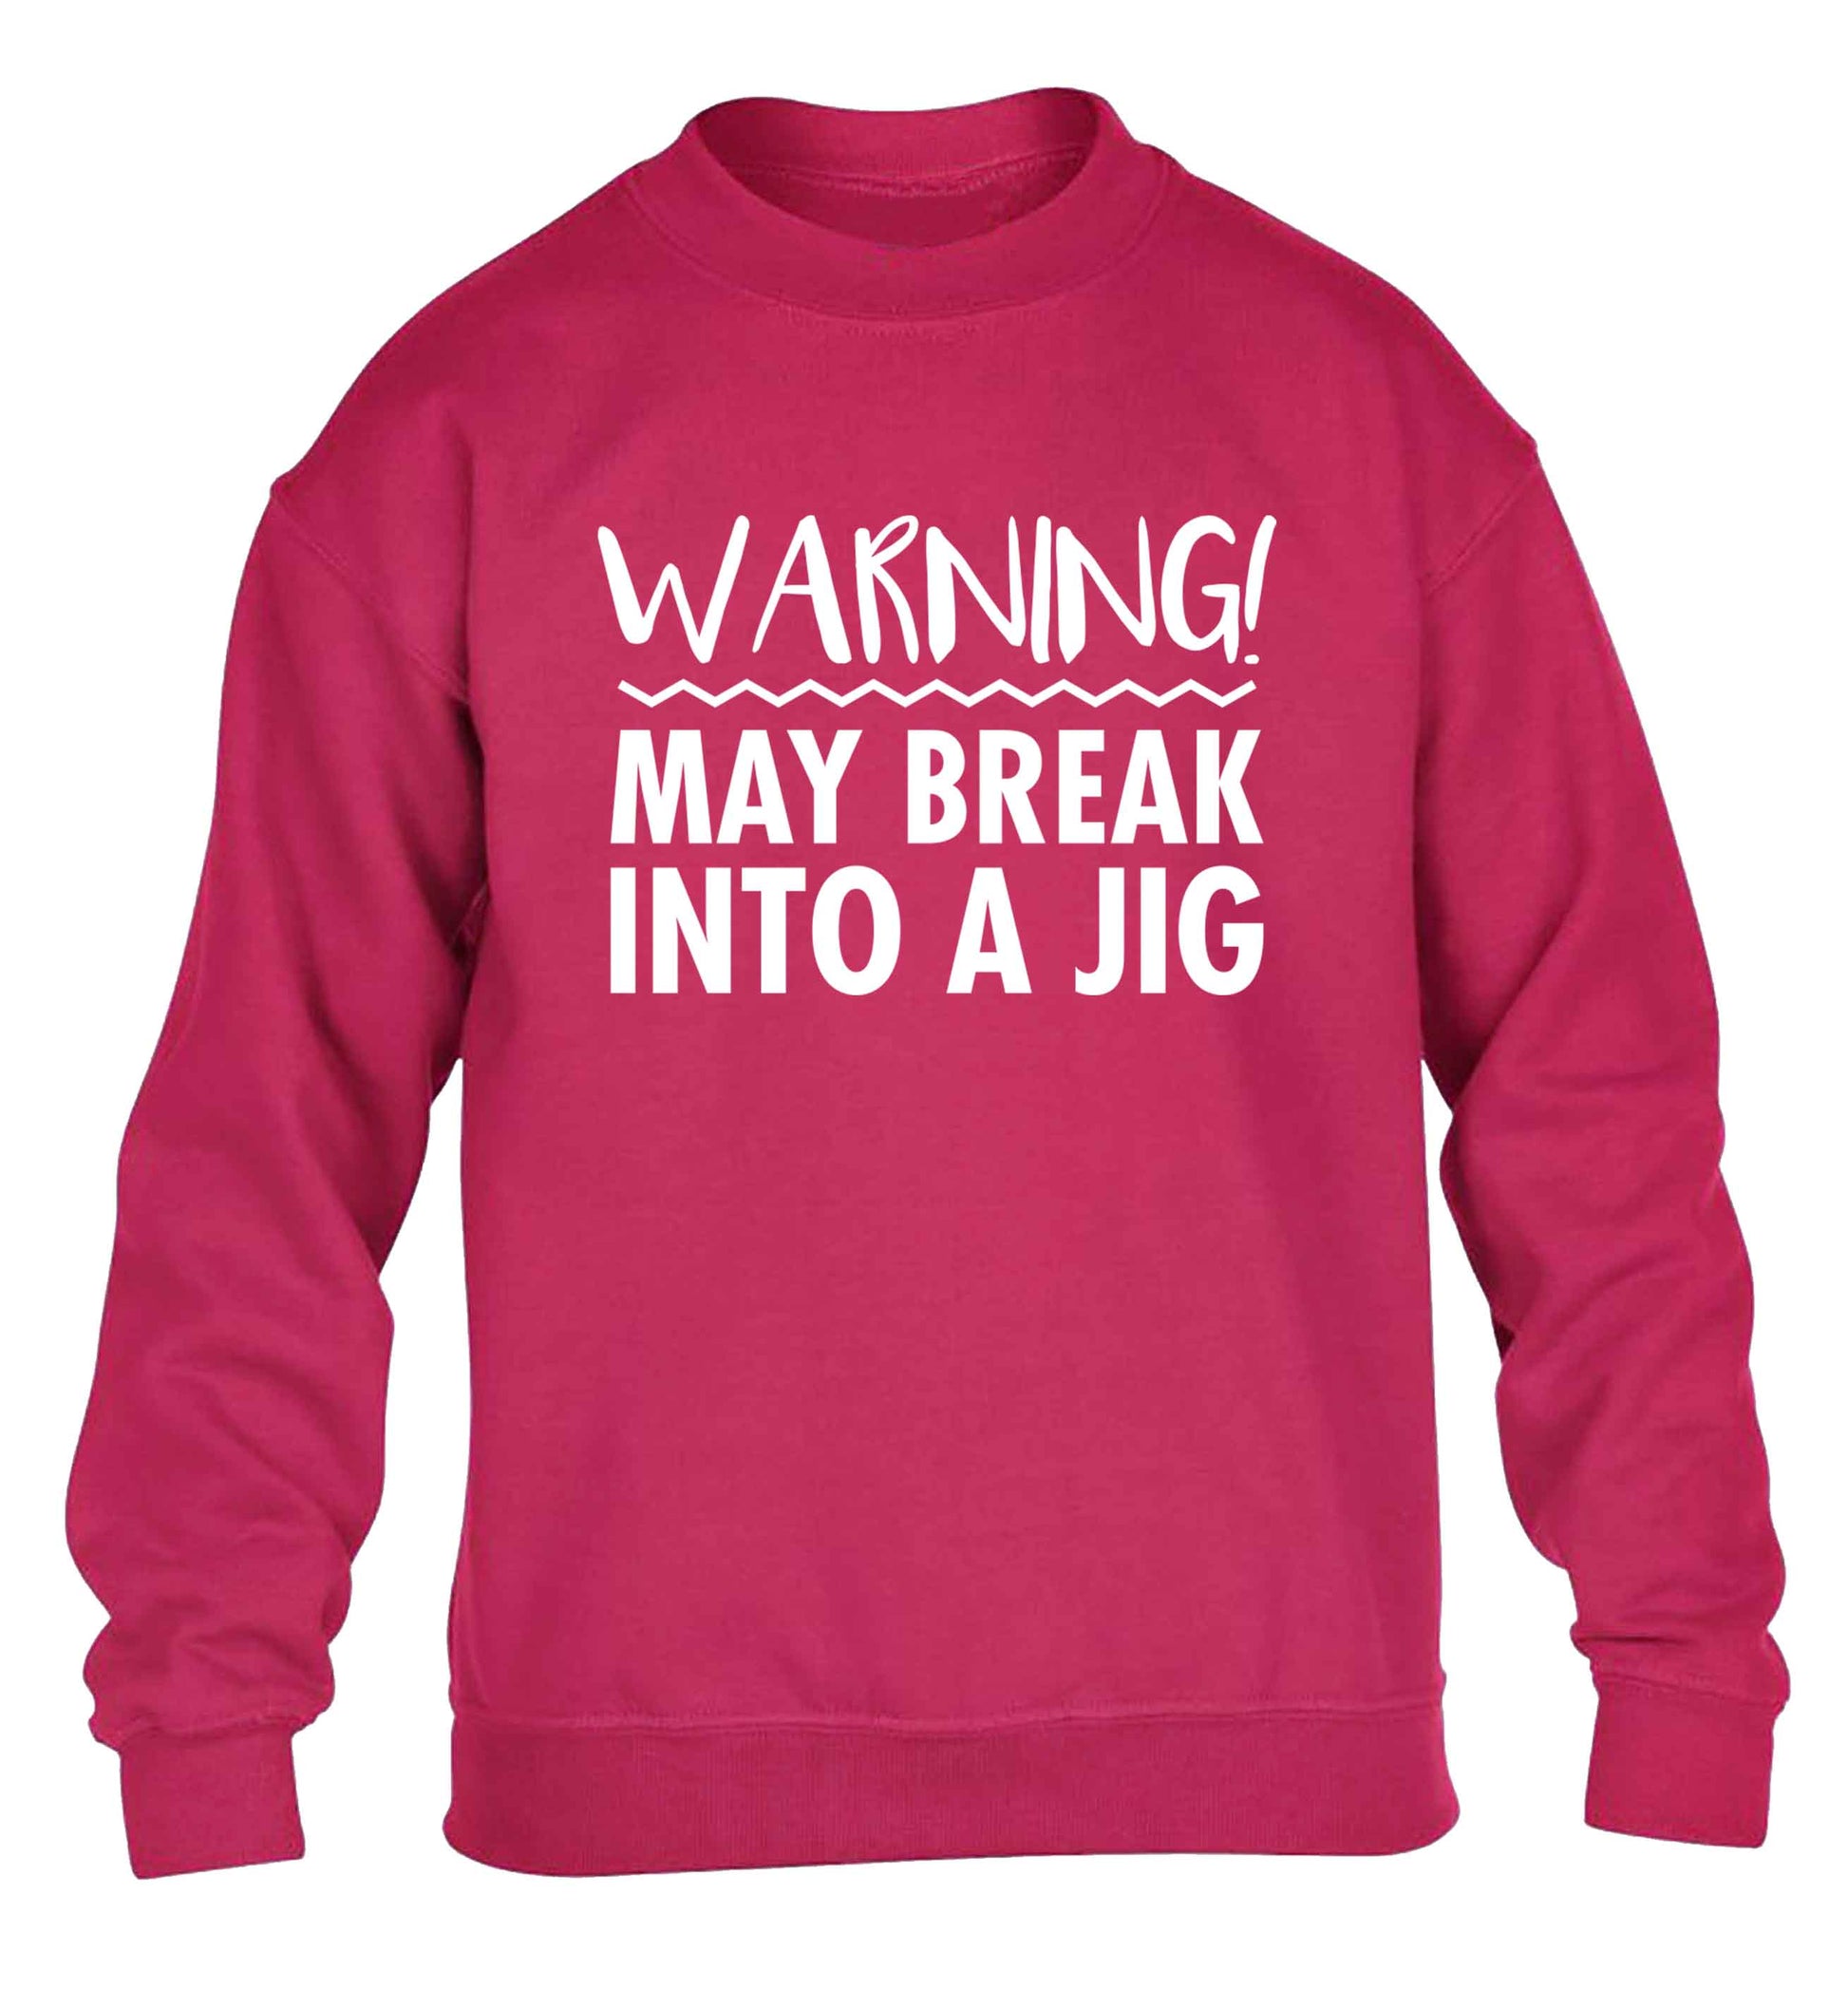 Warning may break into a jig children's pink sweater 12-13 Years